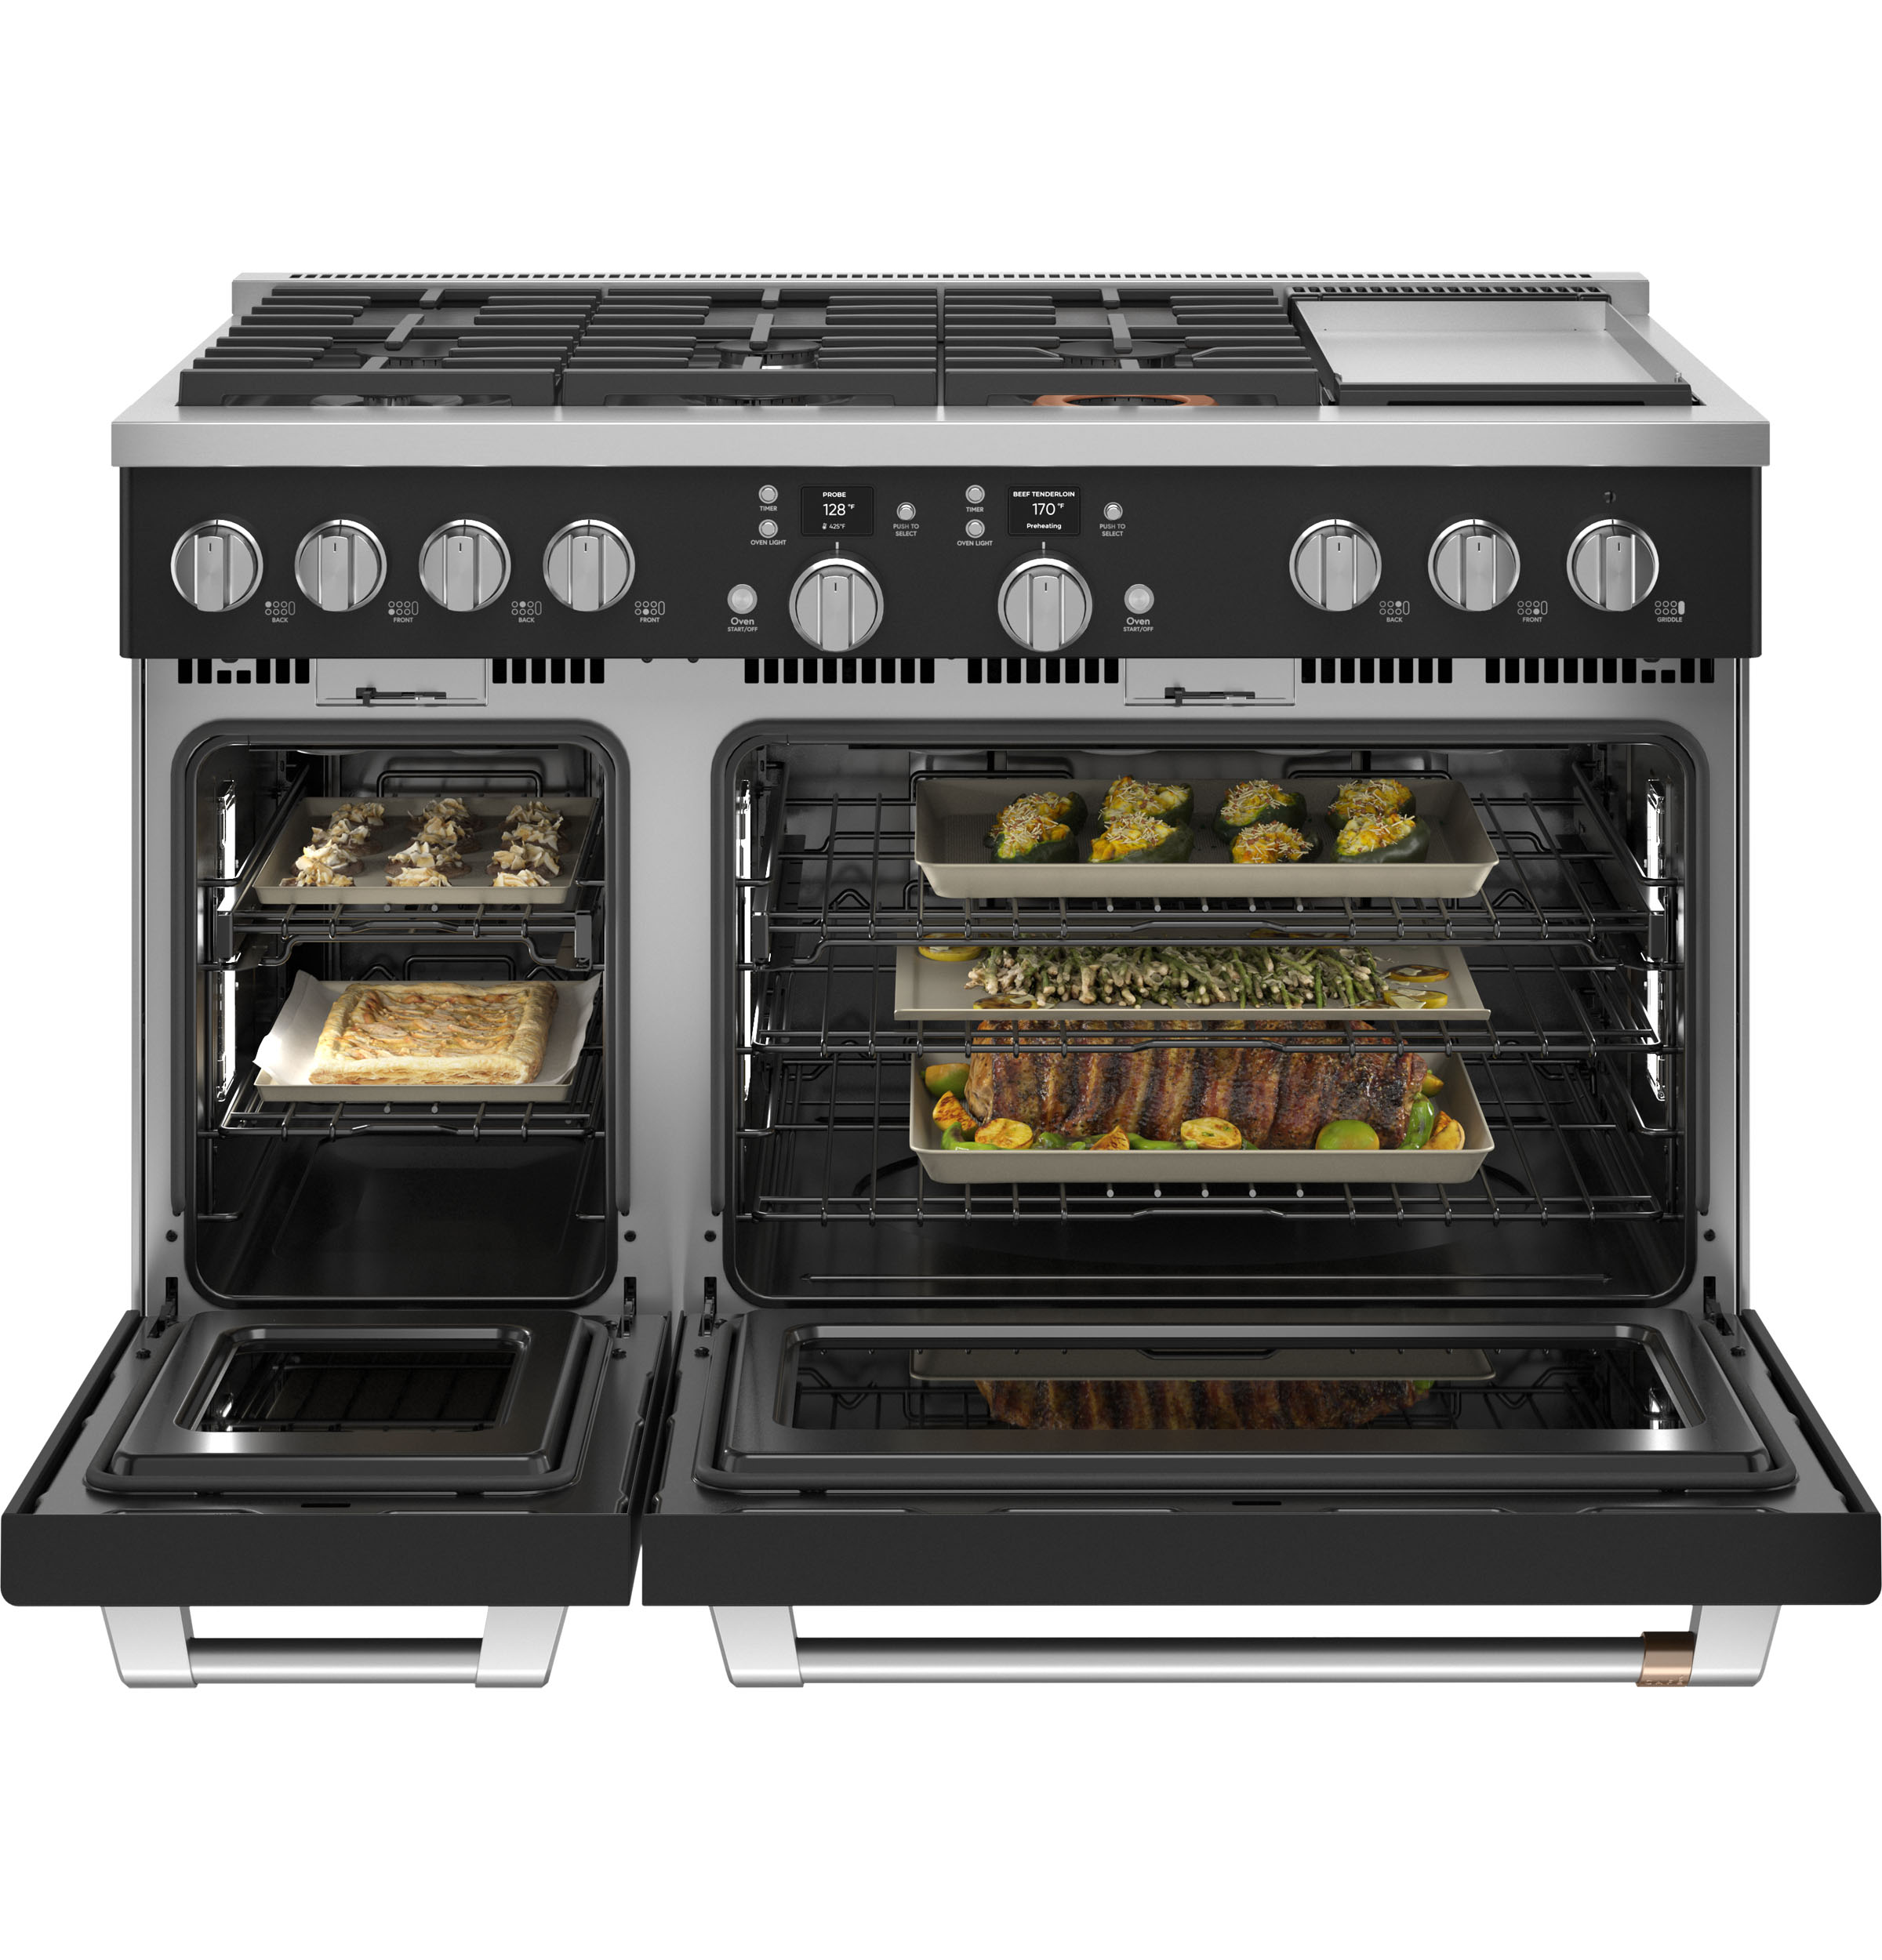 The Mesh Baskets™ for the Smart Oven™ Air